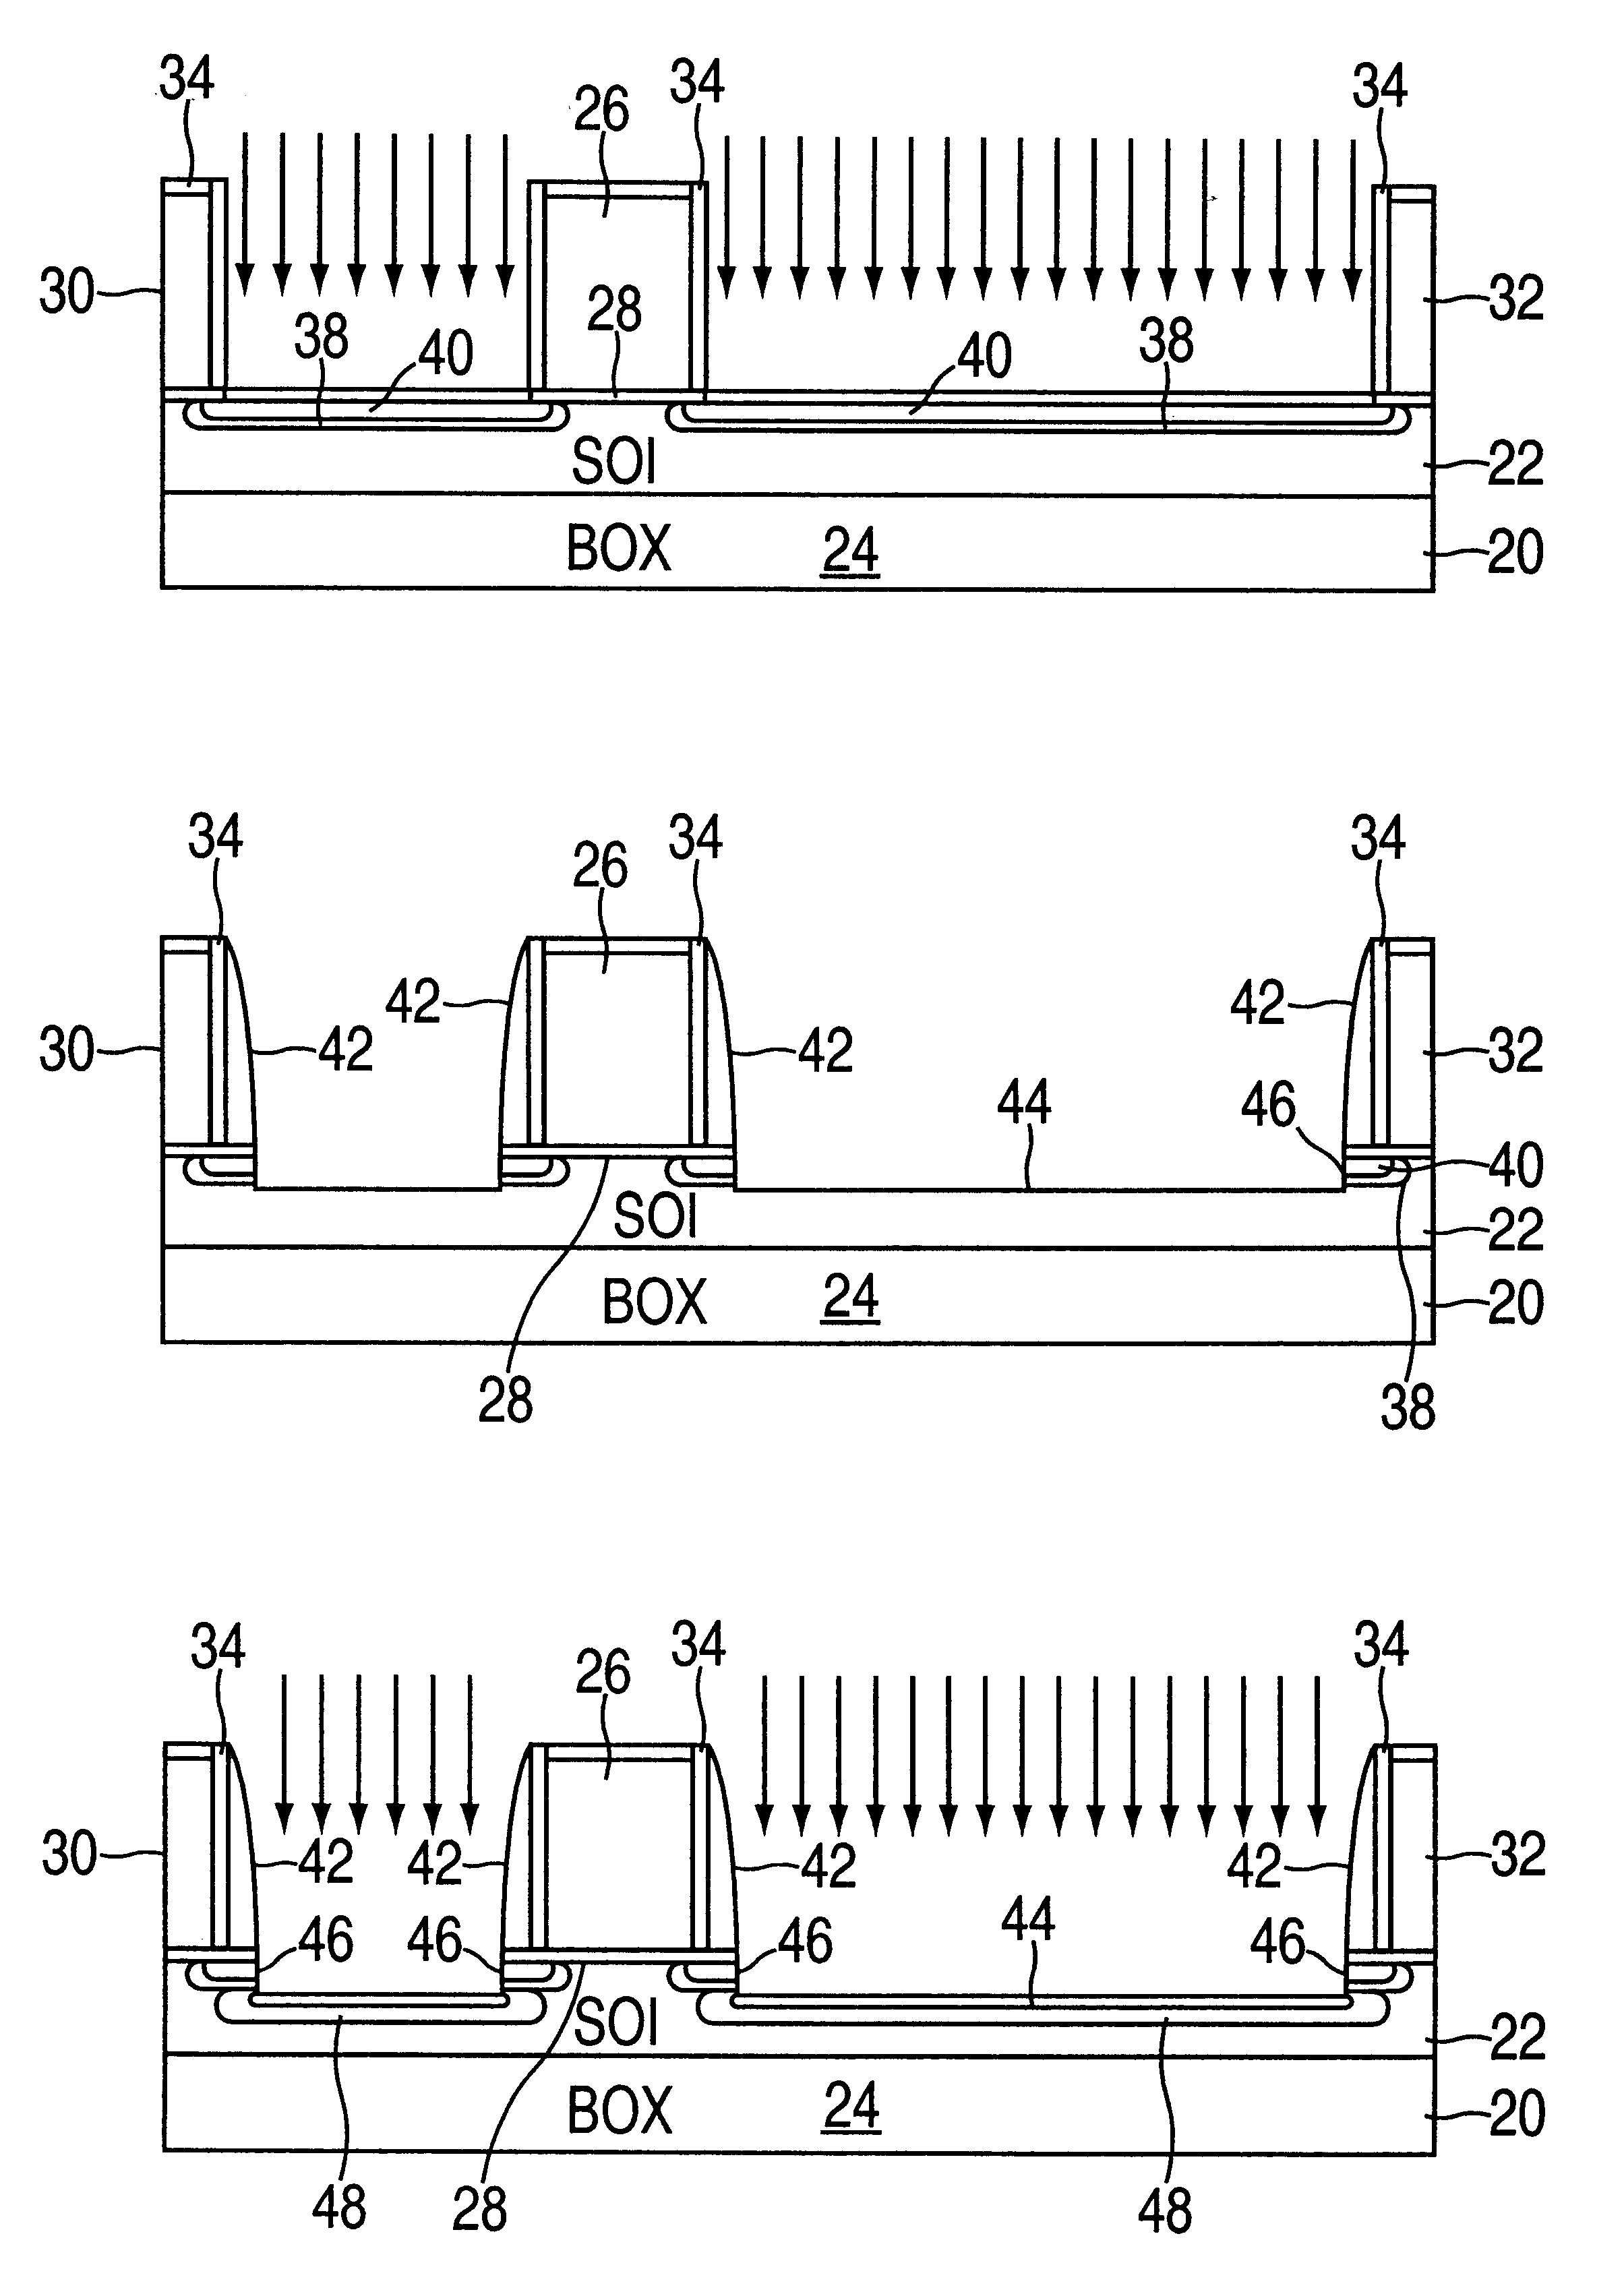 Process for fabricating an MOS device having highly-localized halo regions